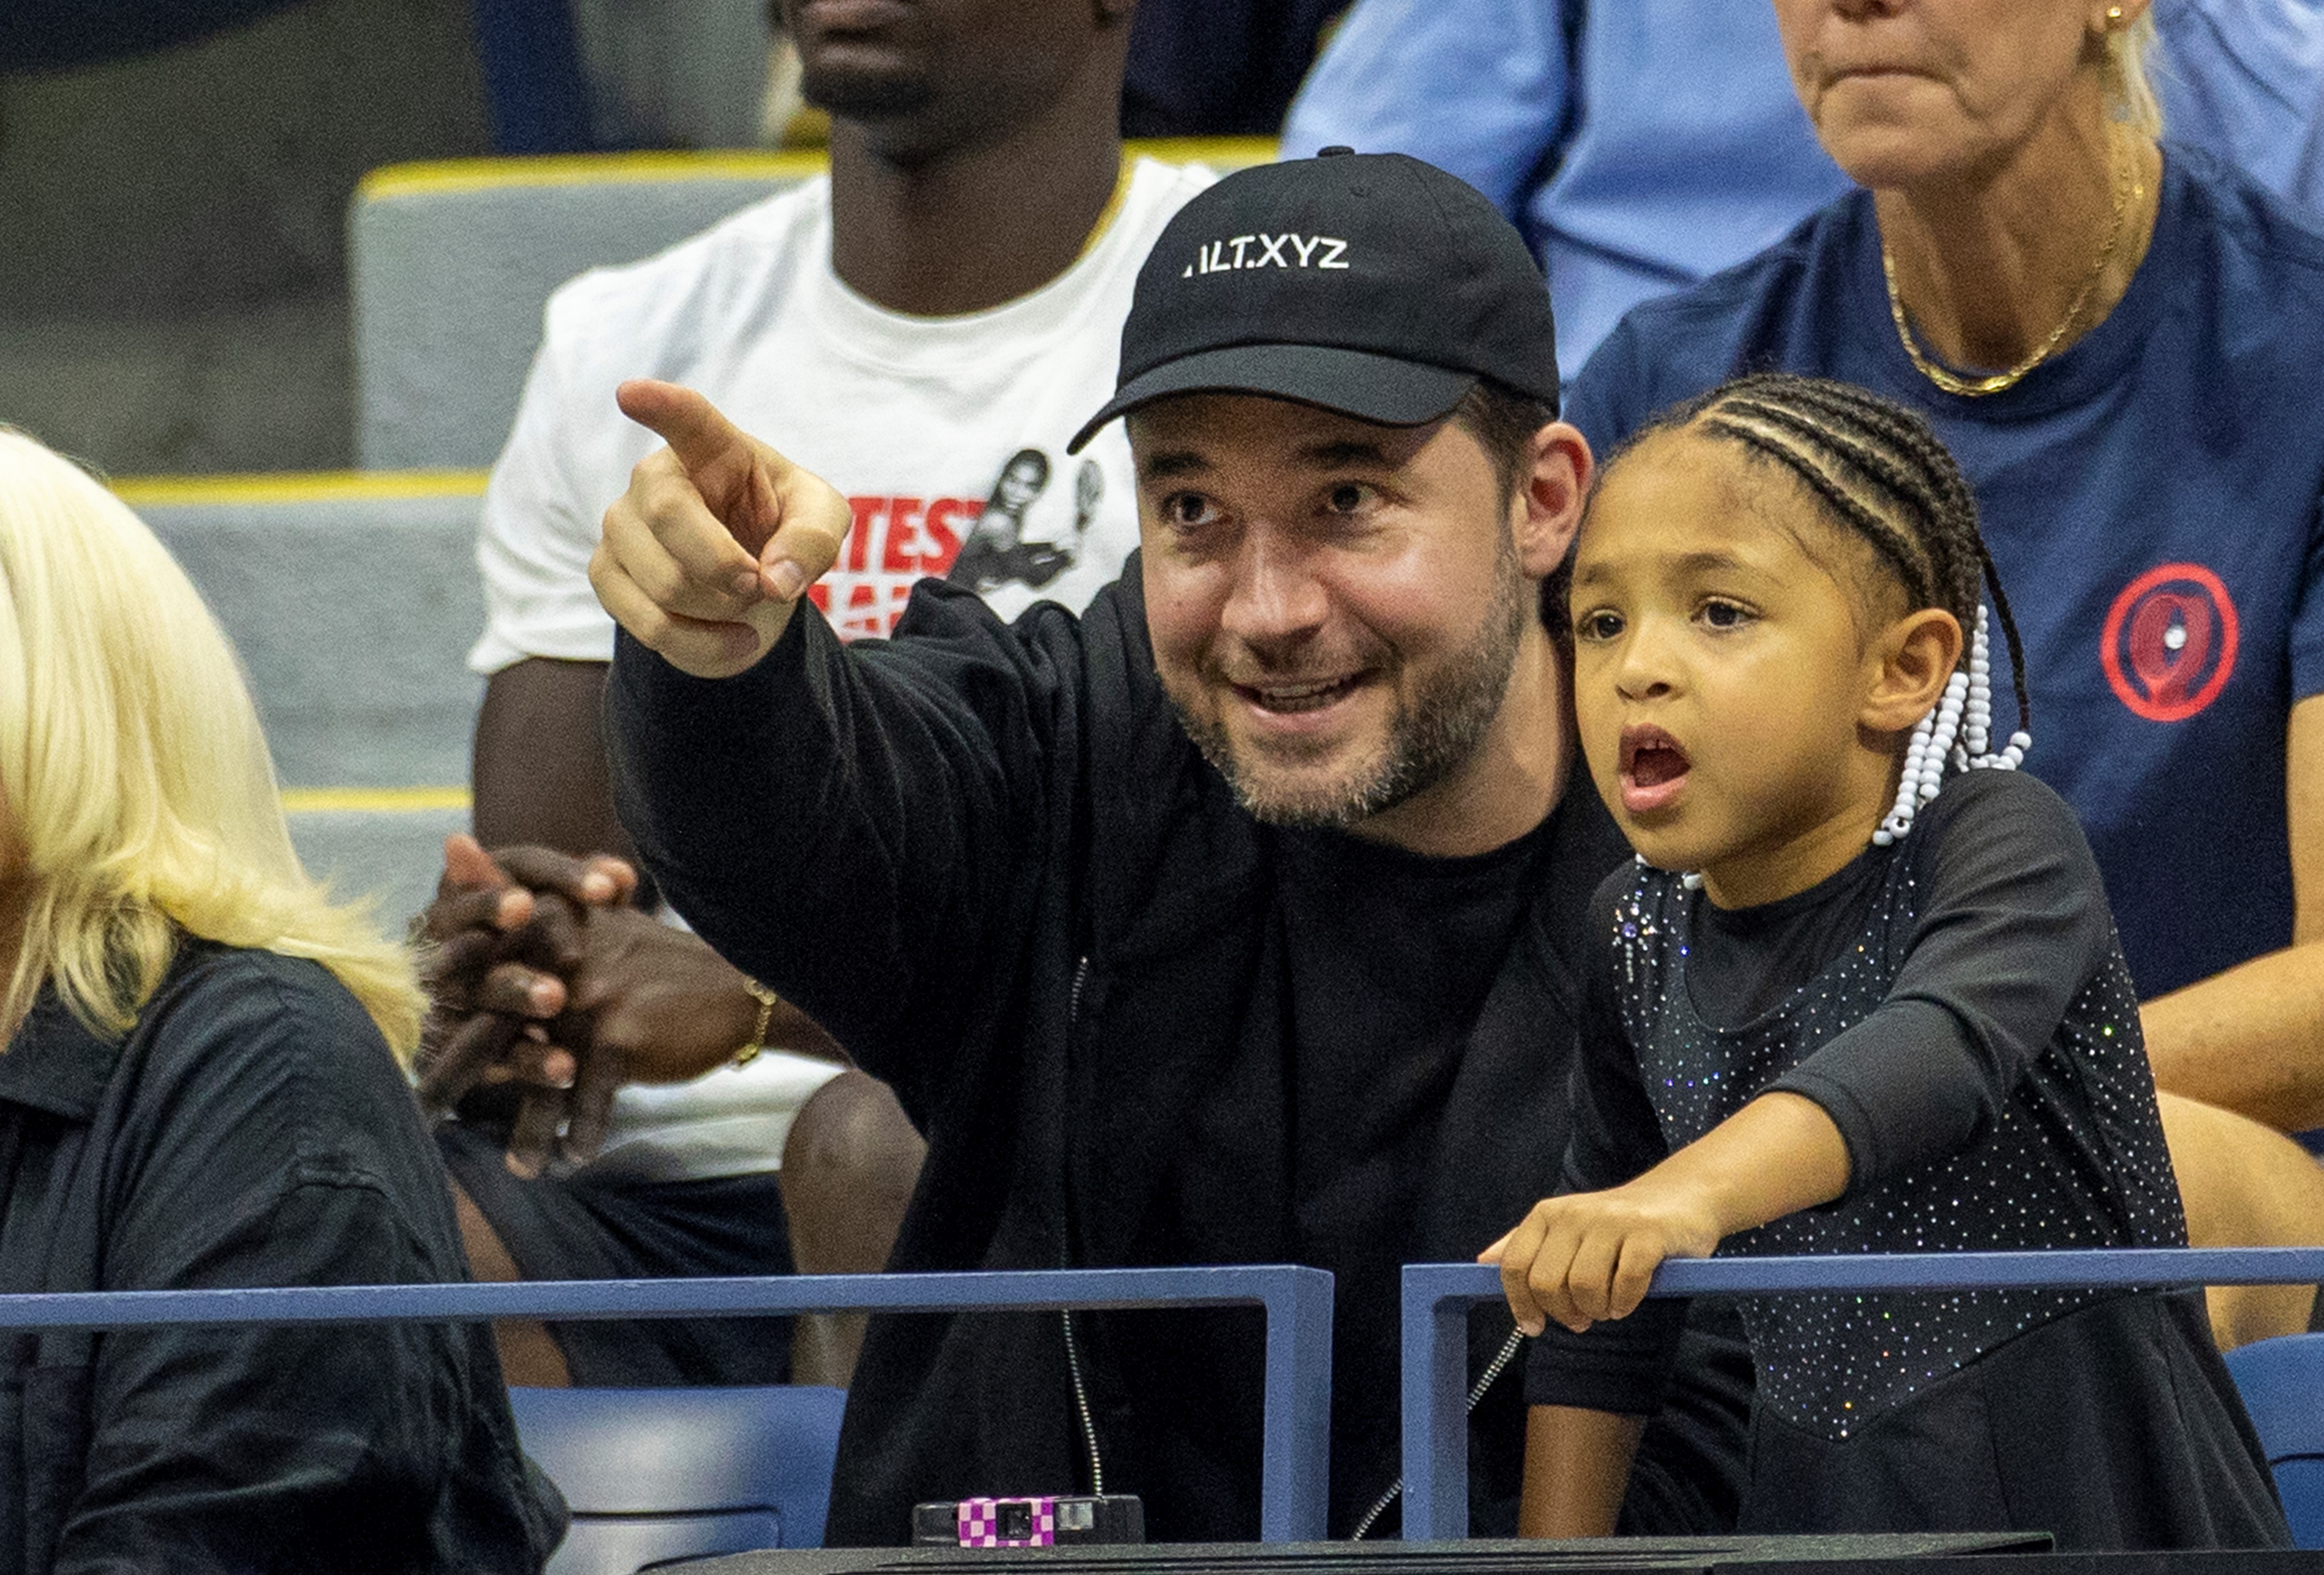 Serna Williams's daughter Alexis Olympia Ohanian Jr and husband Alexis Ohanian at the Arthur Ash Stadium, during  the US Open Tennis Championship 2022, on August 29, 2022, in Flushing, Queens, New York City. | Source: Getty Images